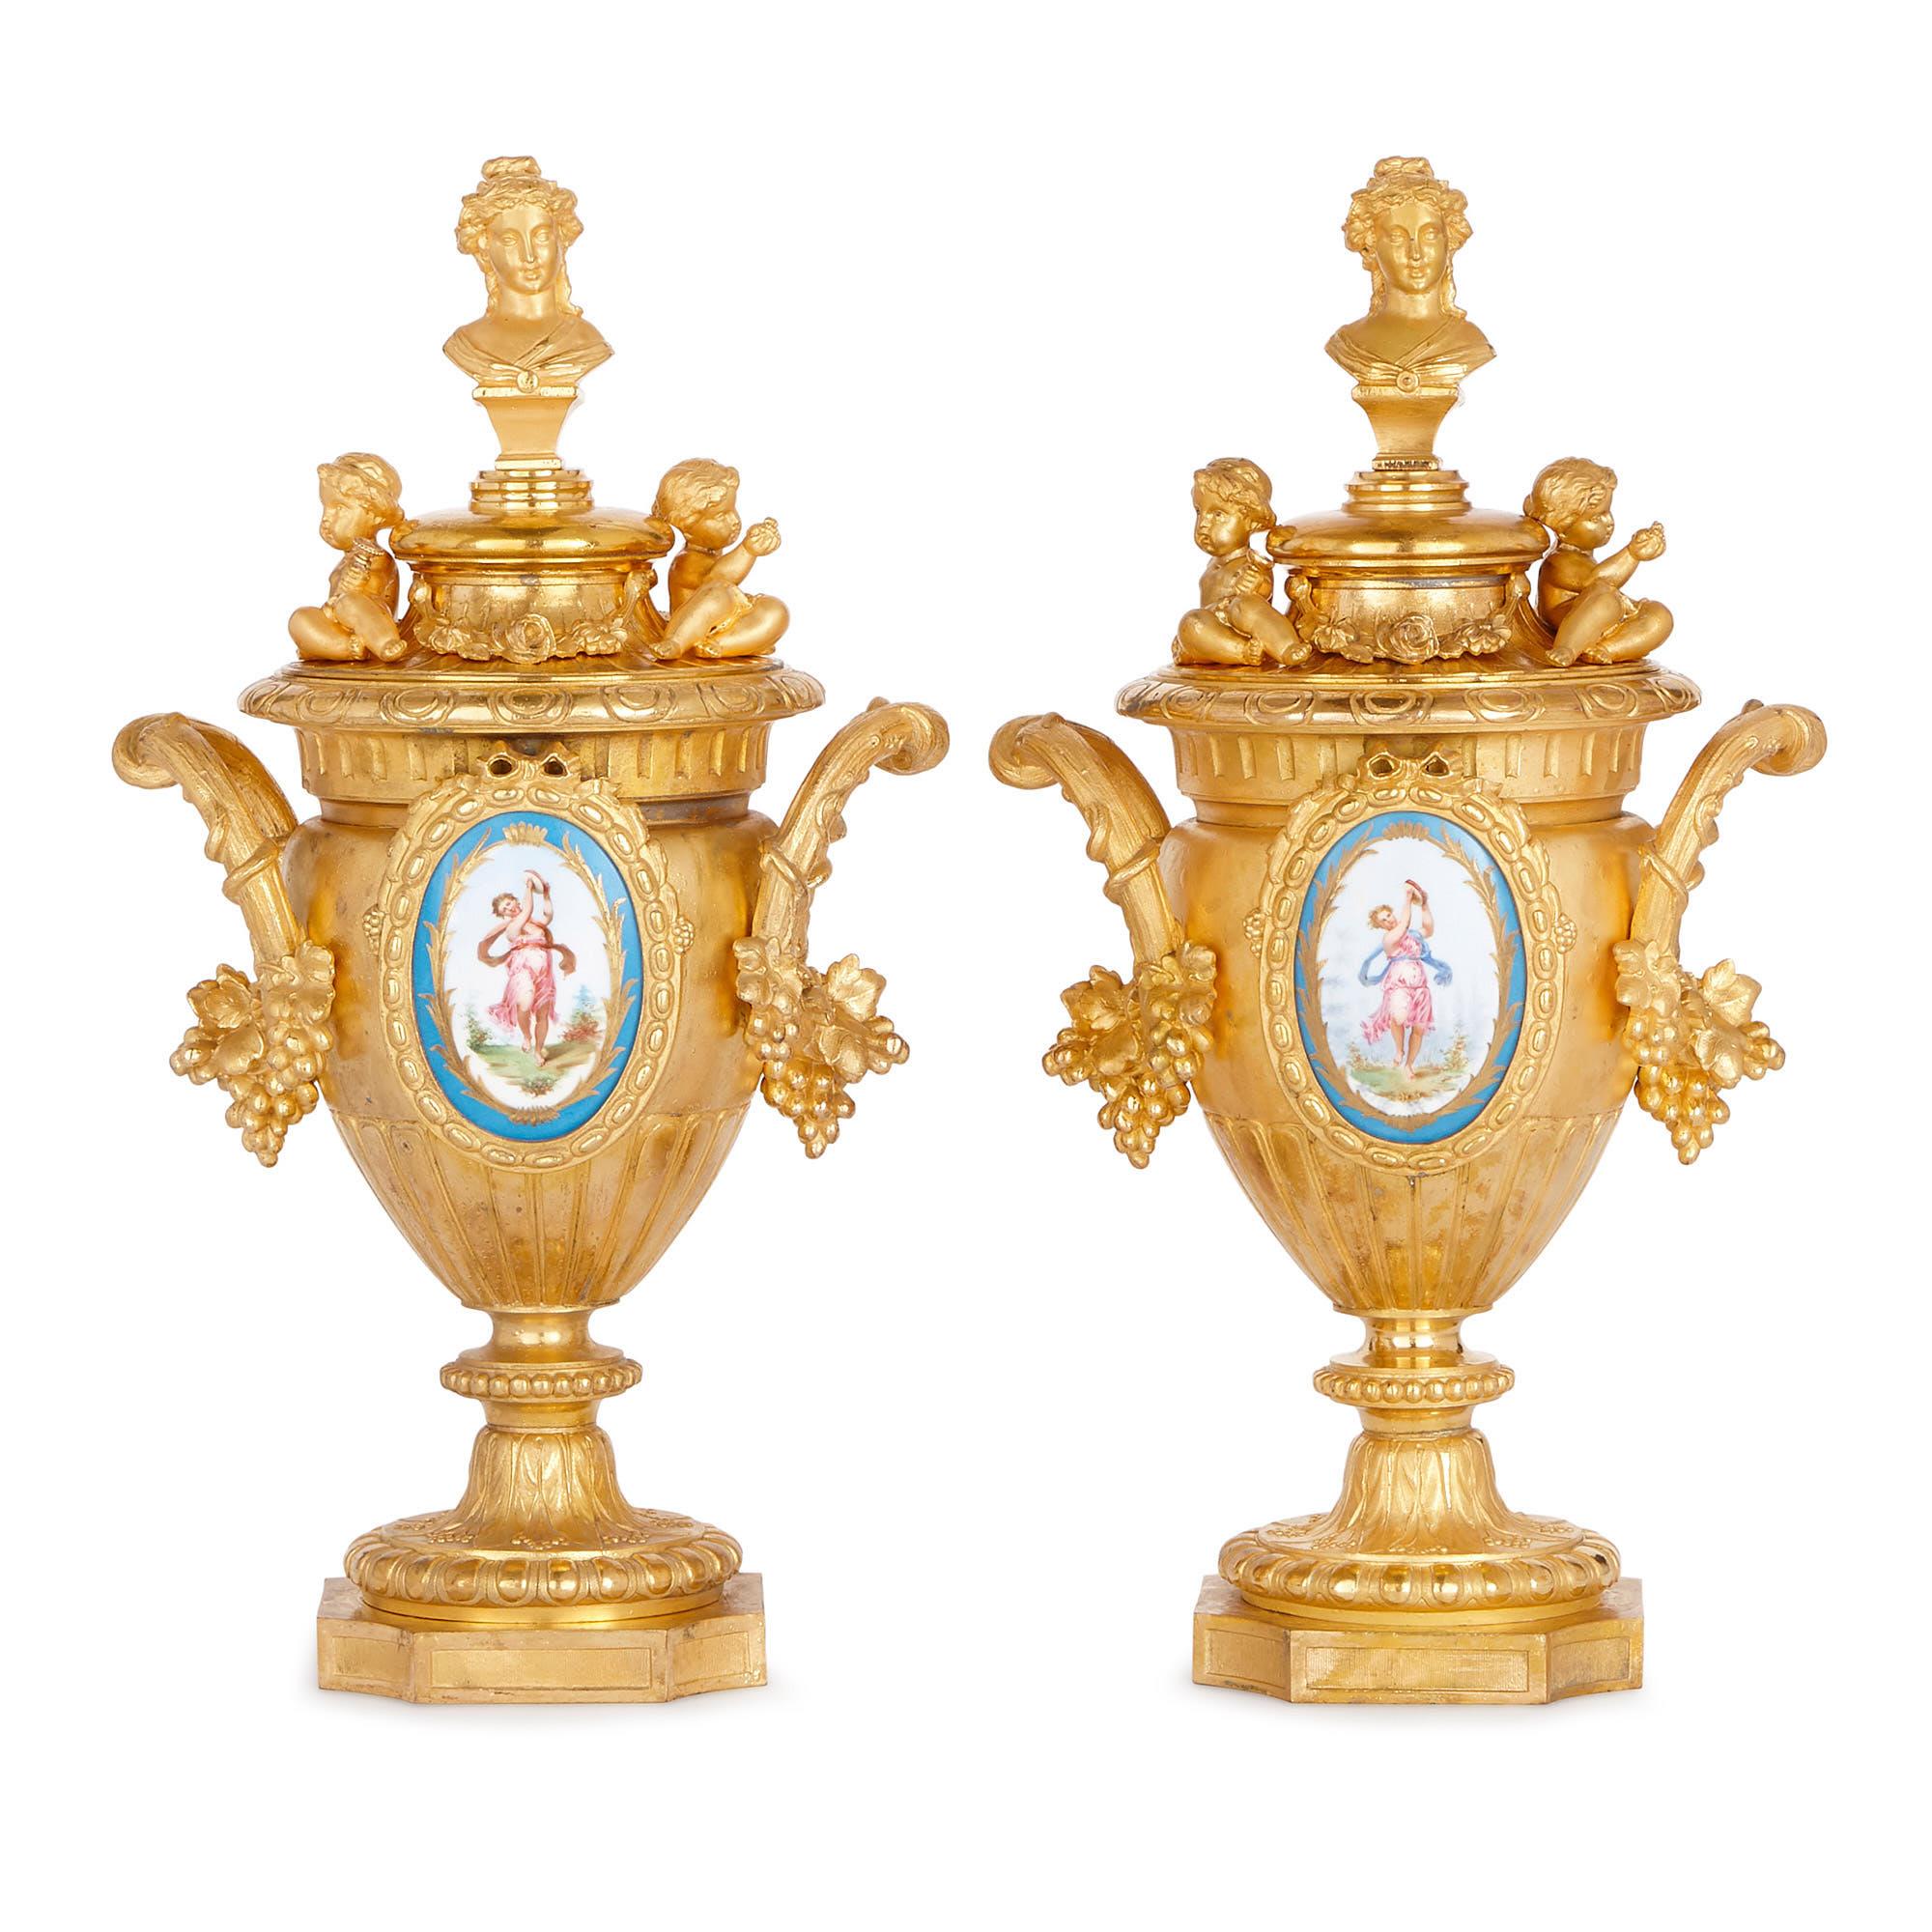 These vases were crafted in the late 19th century by the French sculptor, Phillippe H. Mourey. The items have been created from gilt metal and mounted with porcelain plaques, which is characteristic of Mourey’s work. 

The krater-shaped vases are